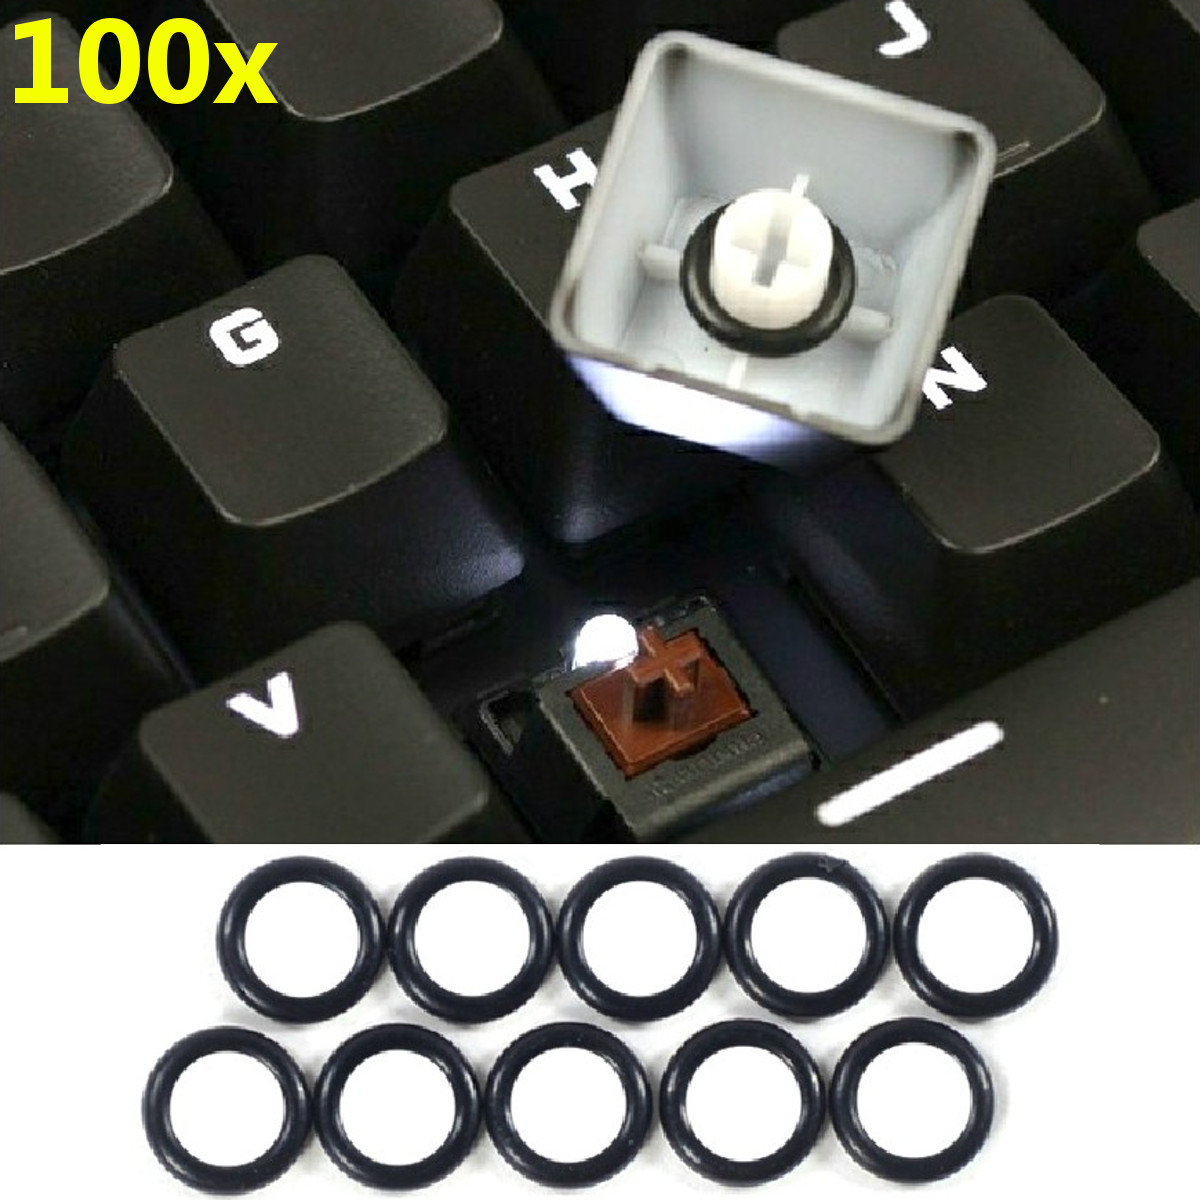 100 Mechanical Keyboard Keycap Rubber O-Ring Switch Dampeners for Cherry MX 51